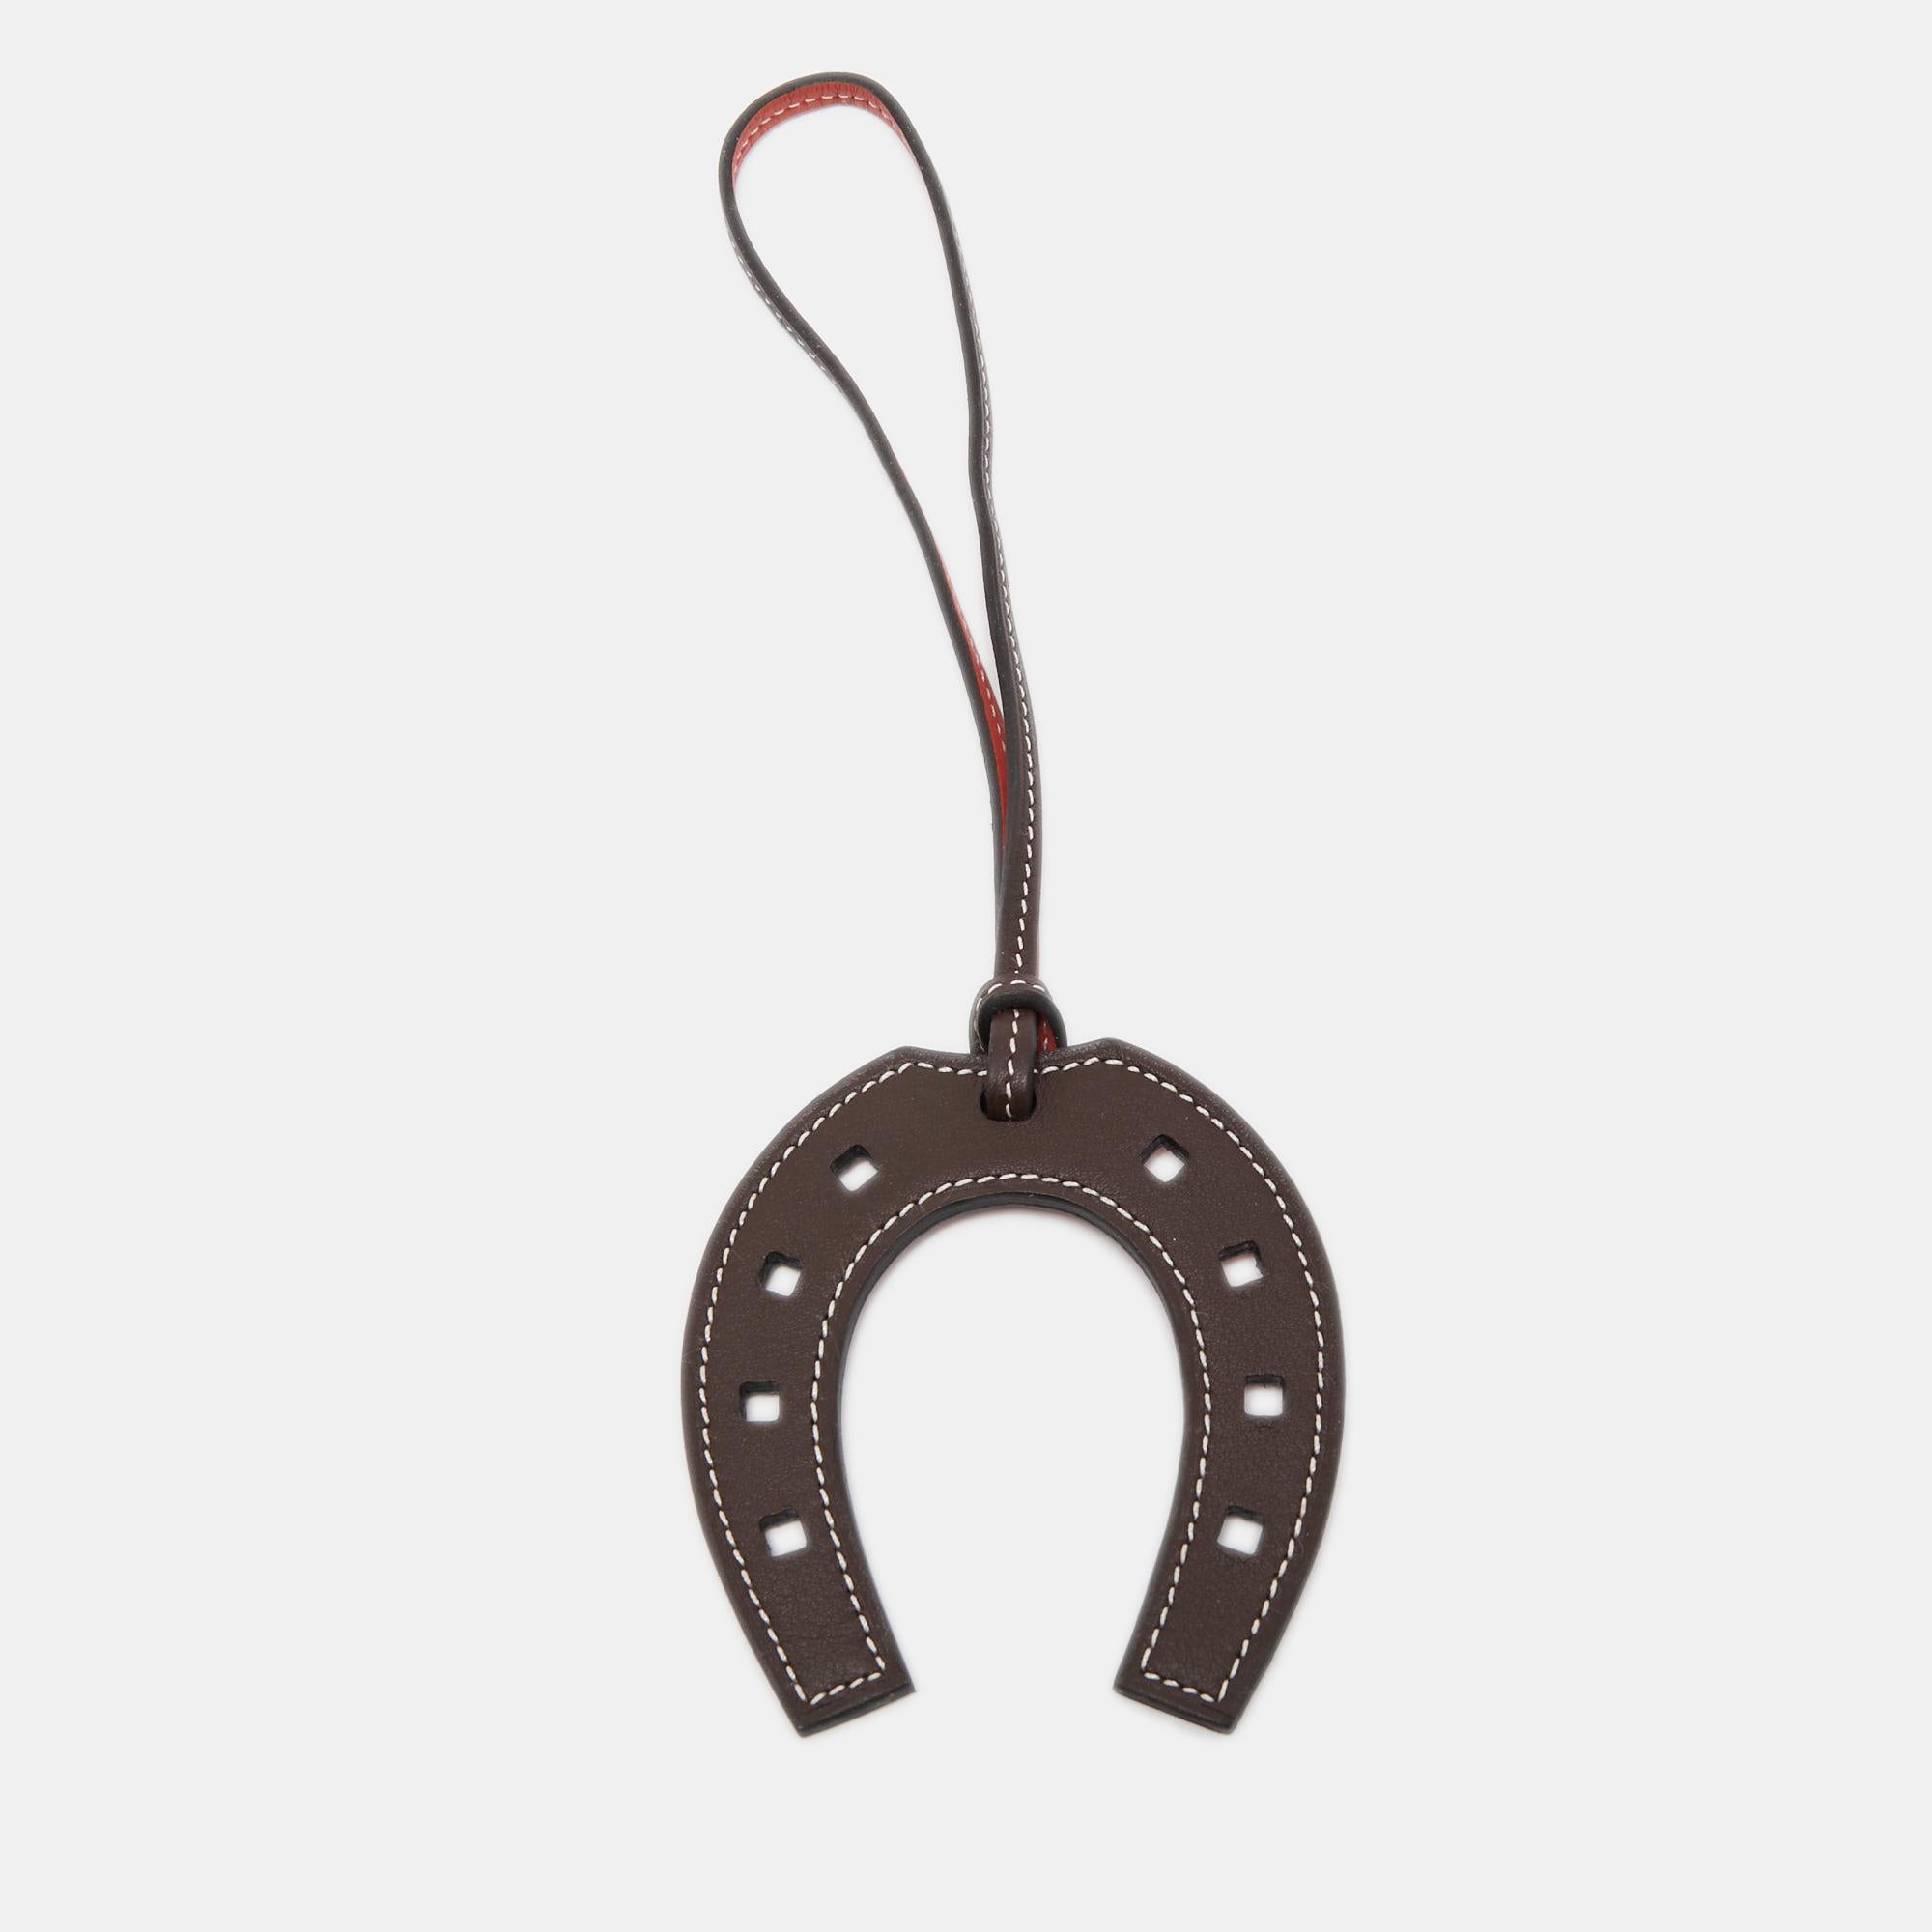 Paying homage to its equestrian heritage, this 'Paddock Fer a Cheval' bag charm from Hermes is a classy accessory to own. It is crafted using Swift leather and hangs from a strap. Needless to say, this Hermes bag charm will add a signature touch to